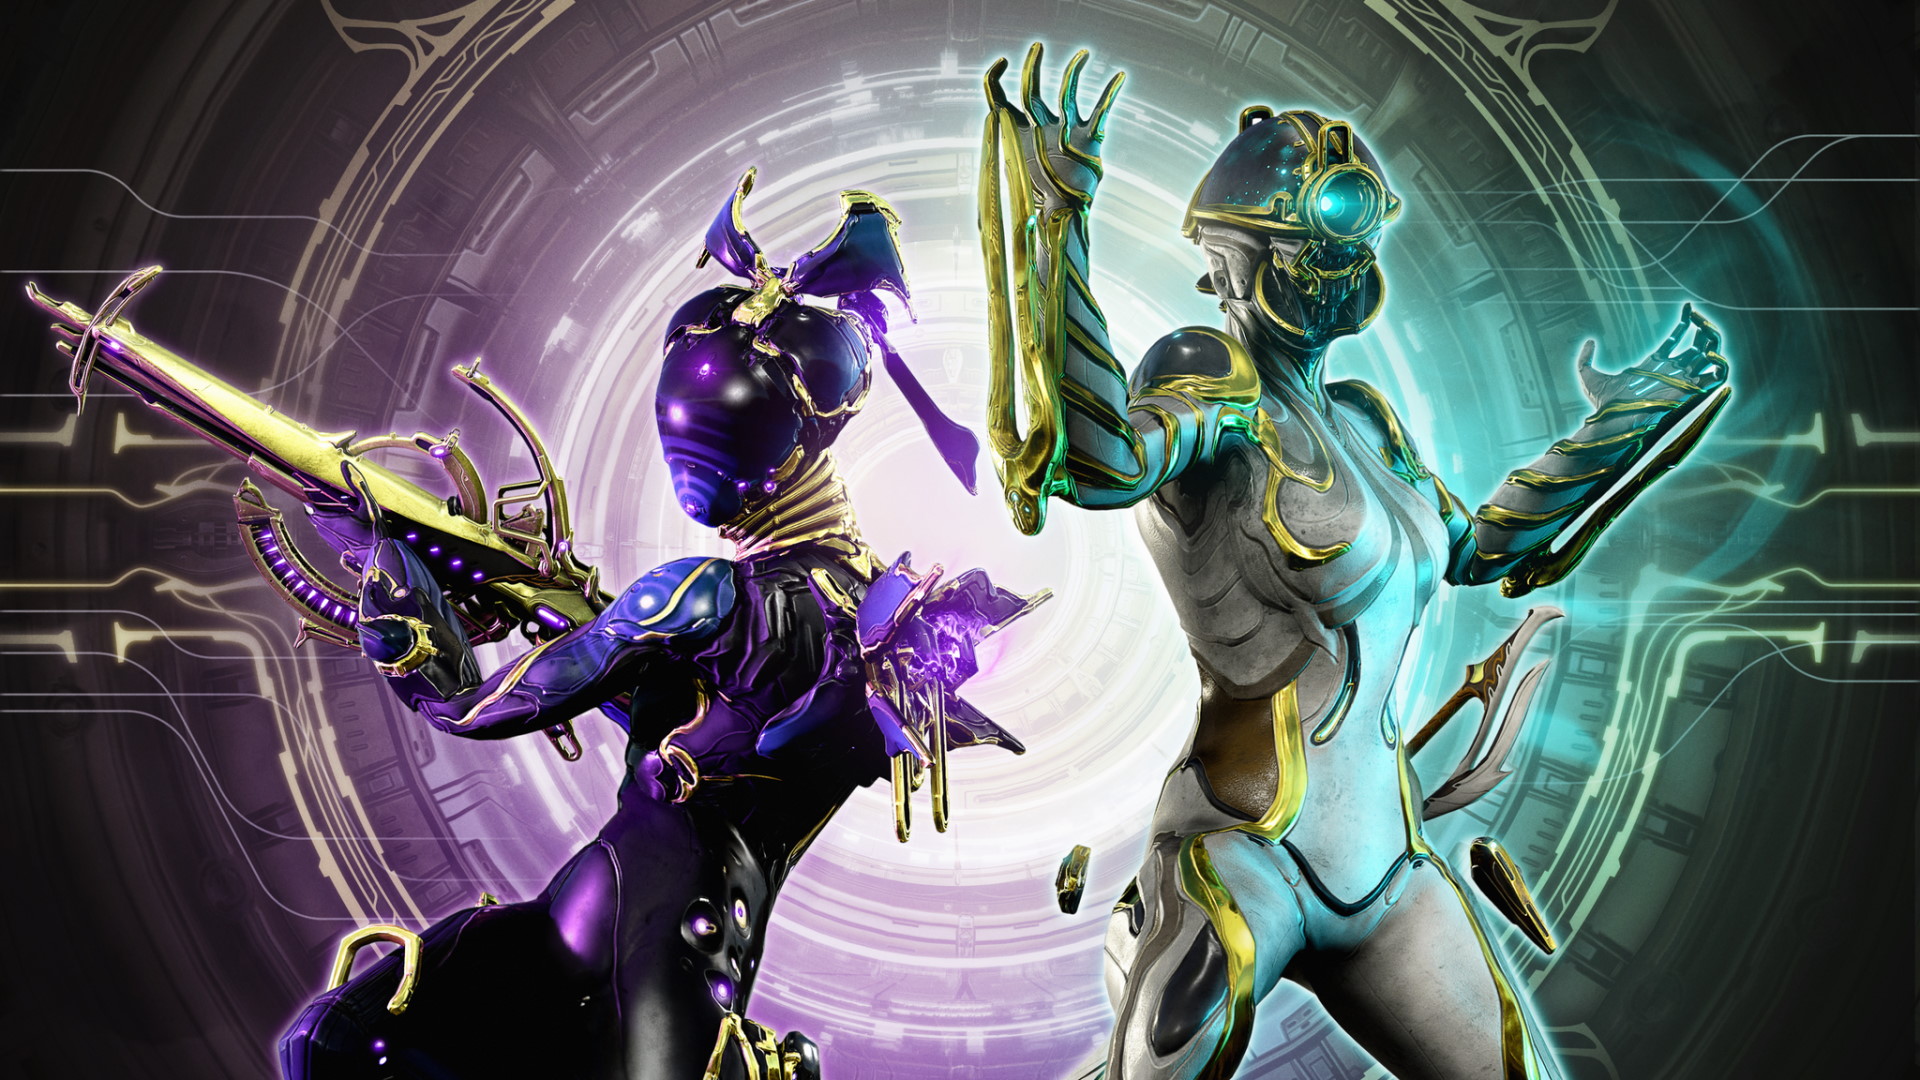  Warframe's biggest cinematic expansion ever is coming in December 